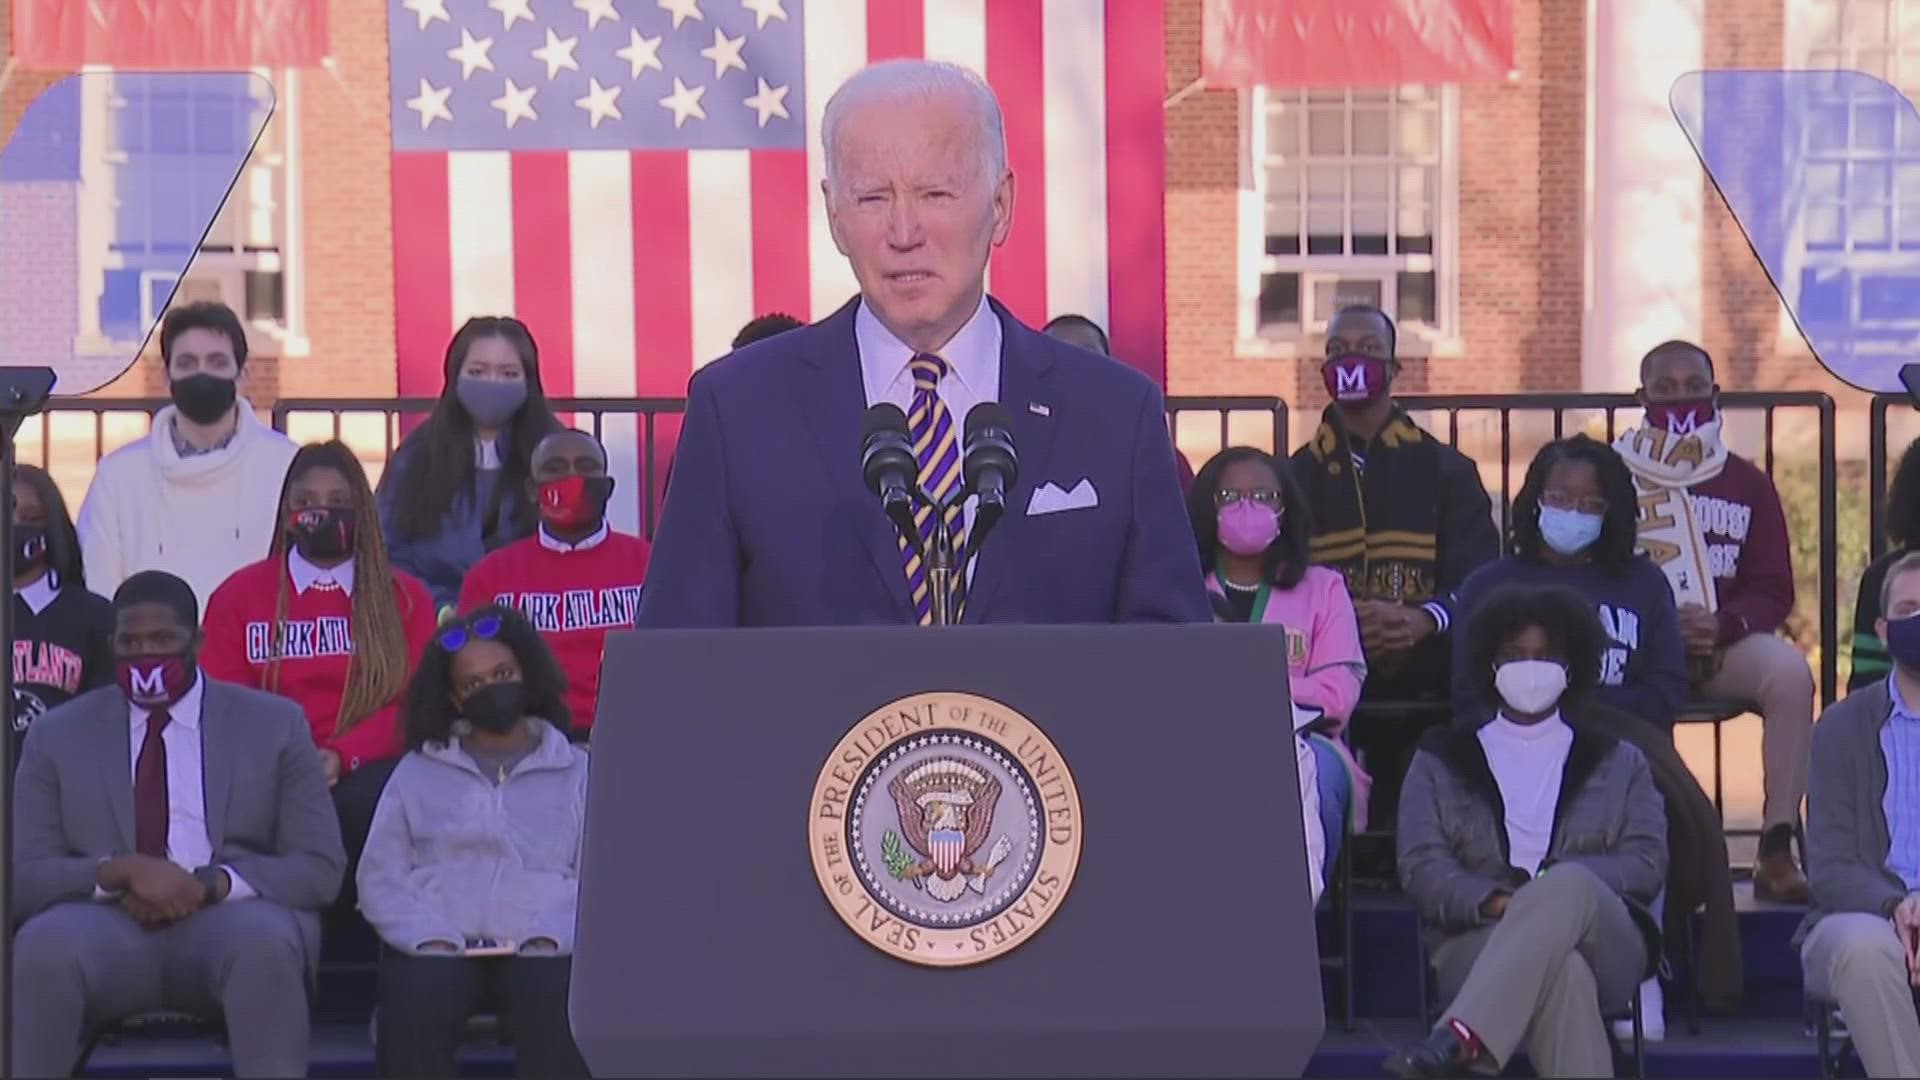 President Biden calls the trend of anti-voting legislation undemocratic. He said it is time to "turn eulogy into action," and pass the John Lewis Voting Rights Act